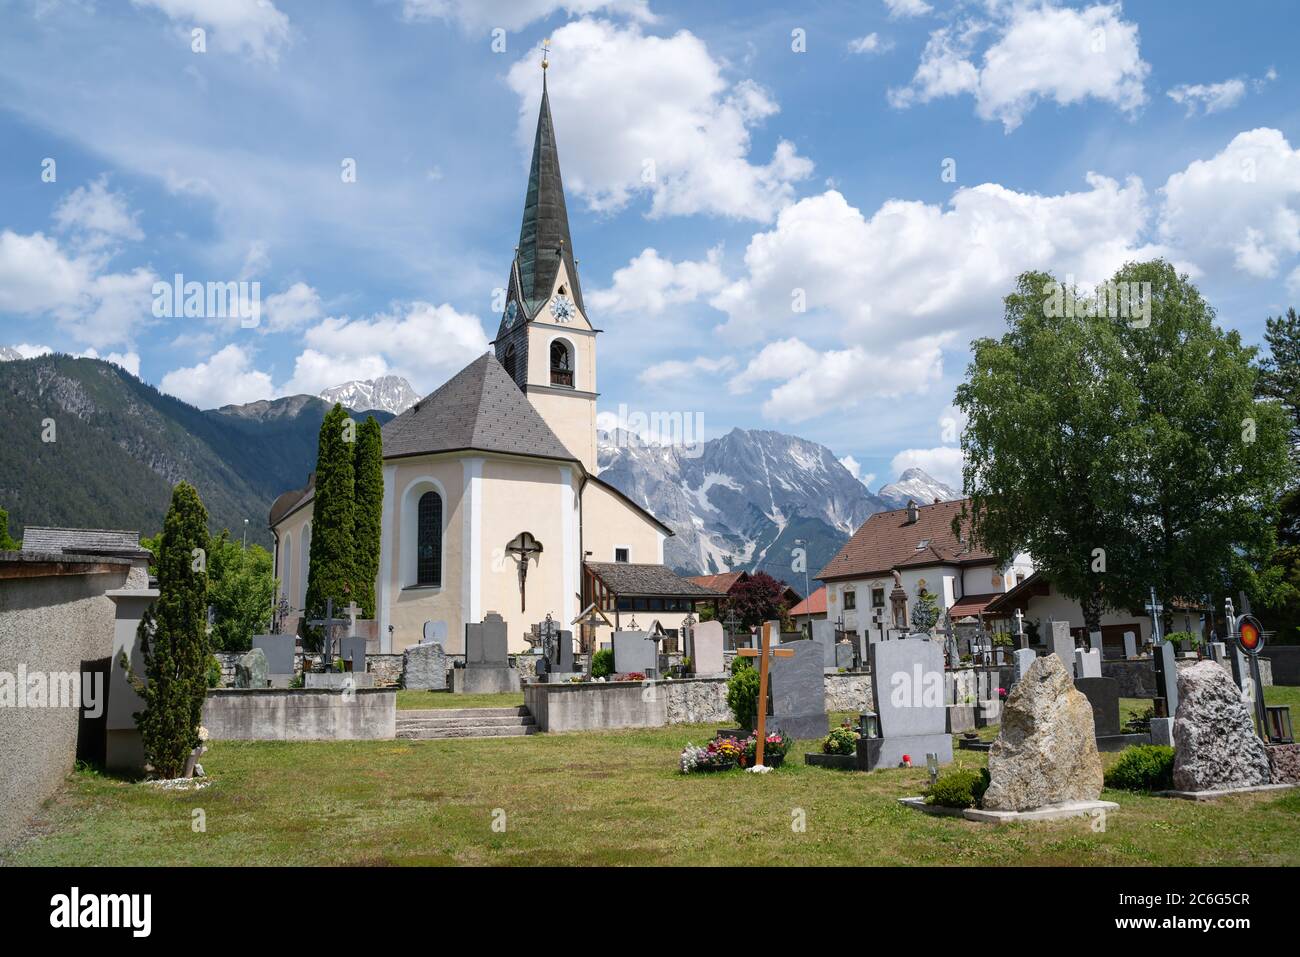 Traditional Austrian village church and cemetery in the sunny alpine mountains, Obsteig, Tirol, Austria Stock Photo